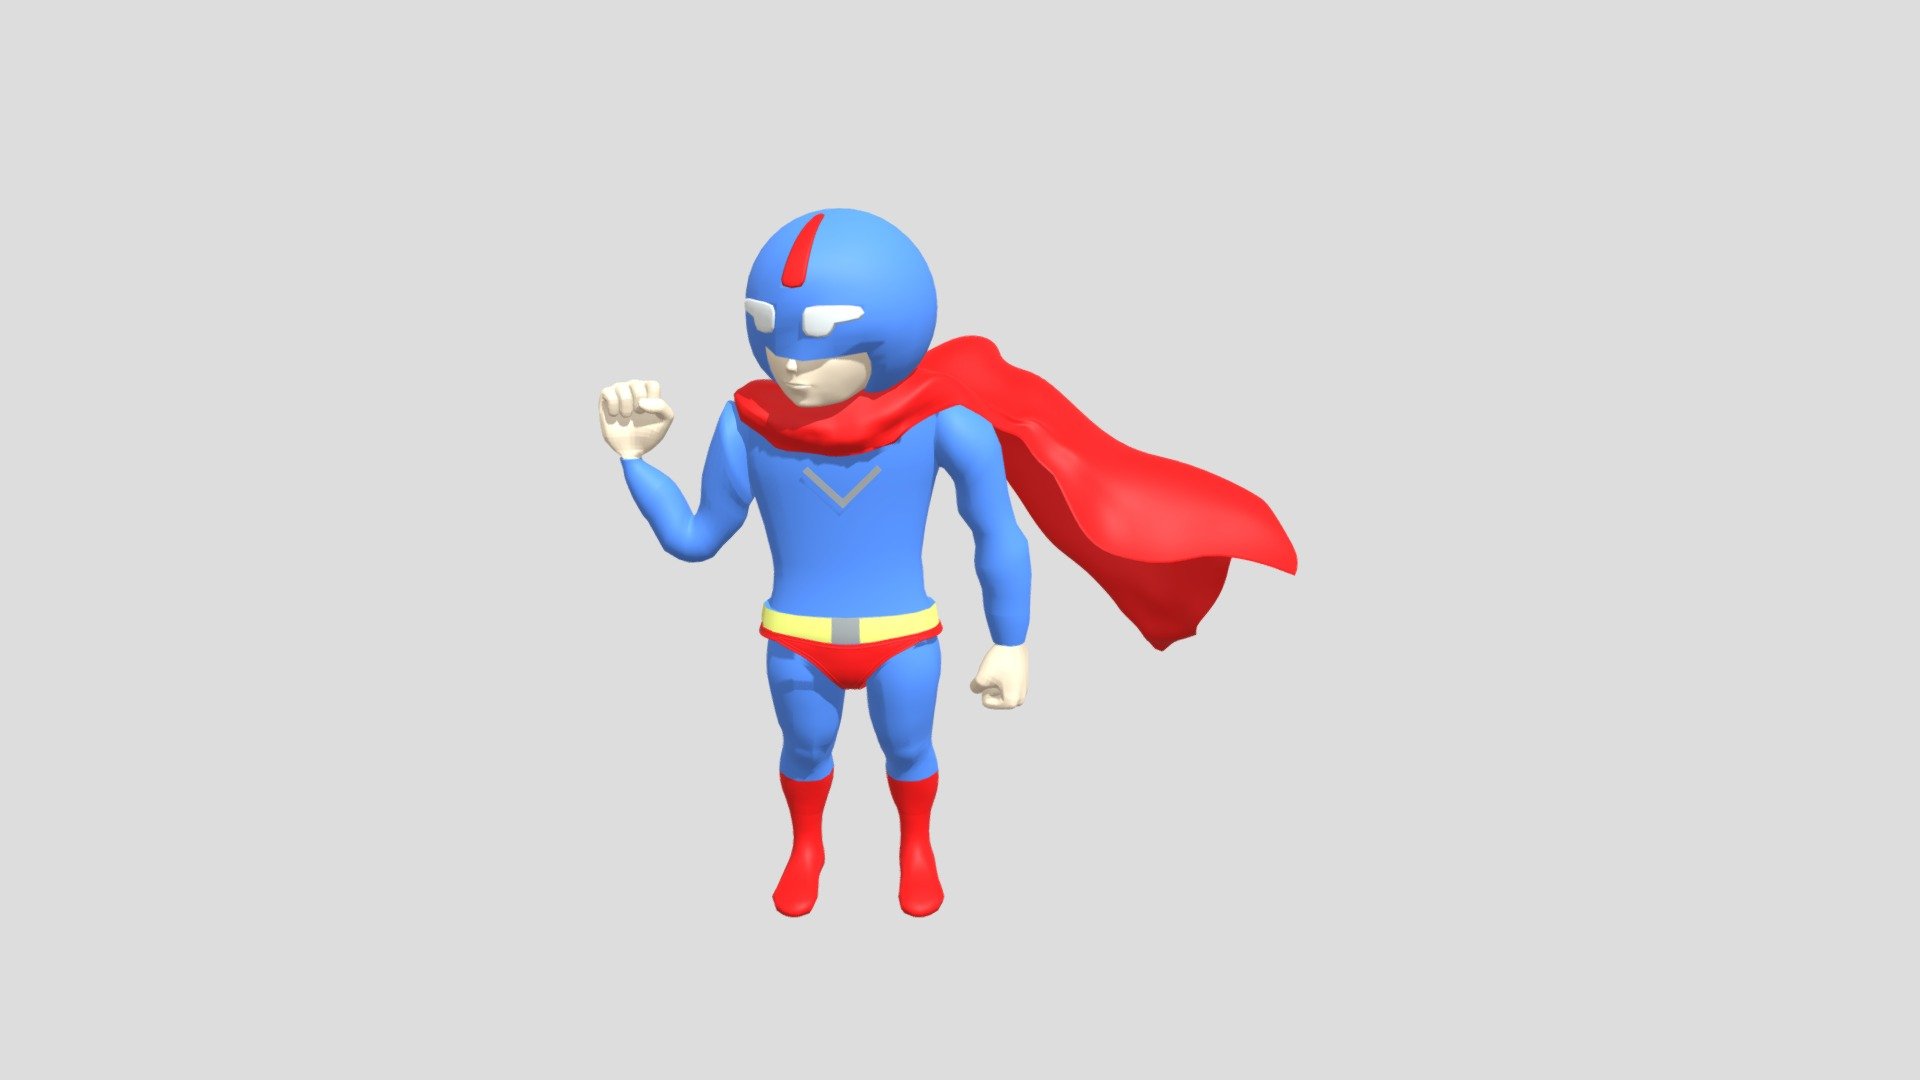 CREATION: This 3D character originally created using Autodesk Maya 2020.
The character can be used in any animated video or maybe in games.

TEXTURE: The model has been textured properly giving the style of a super man.

RENDERING: The 3D model has been rendered with proper lights

FORMAT: Available best formats are .ma .mb .obj .fbx. Available other formats are 3D studio model, C4D file, DAE, STL, ZBrush, Blender, Photoshop and after effects.

CUSTOM DESIGN: For custom design and textures, feel free to contact me 3d model